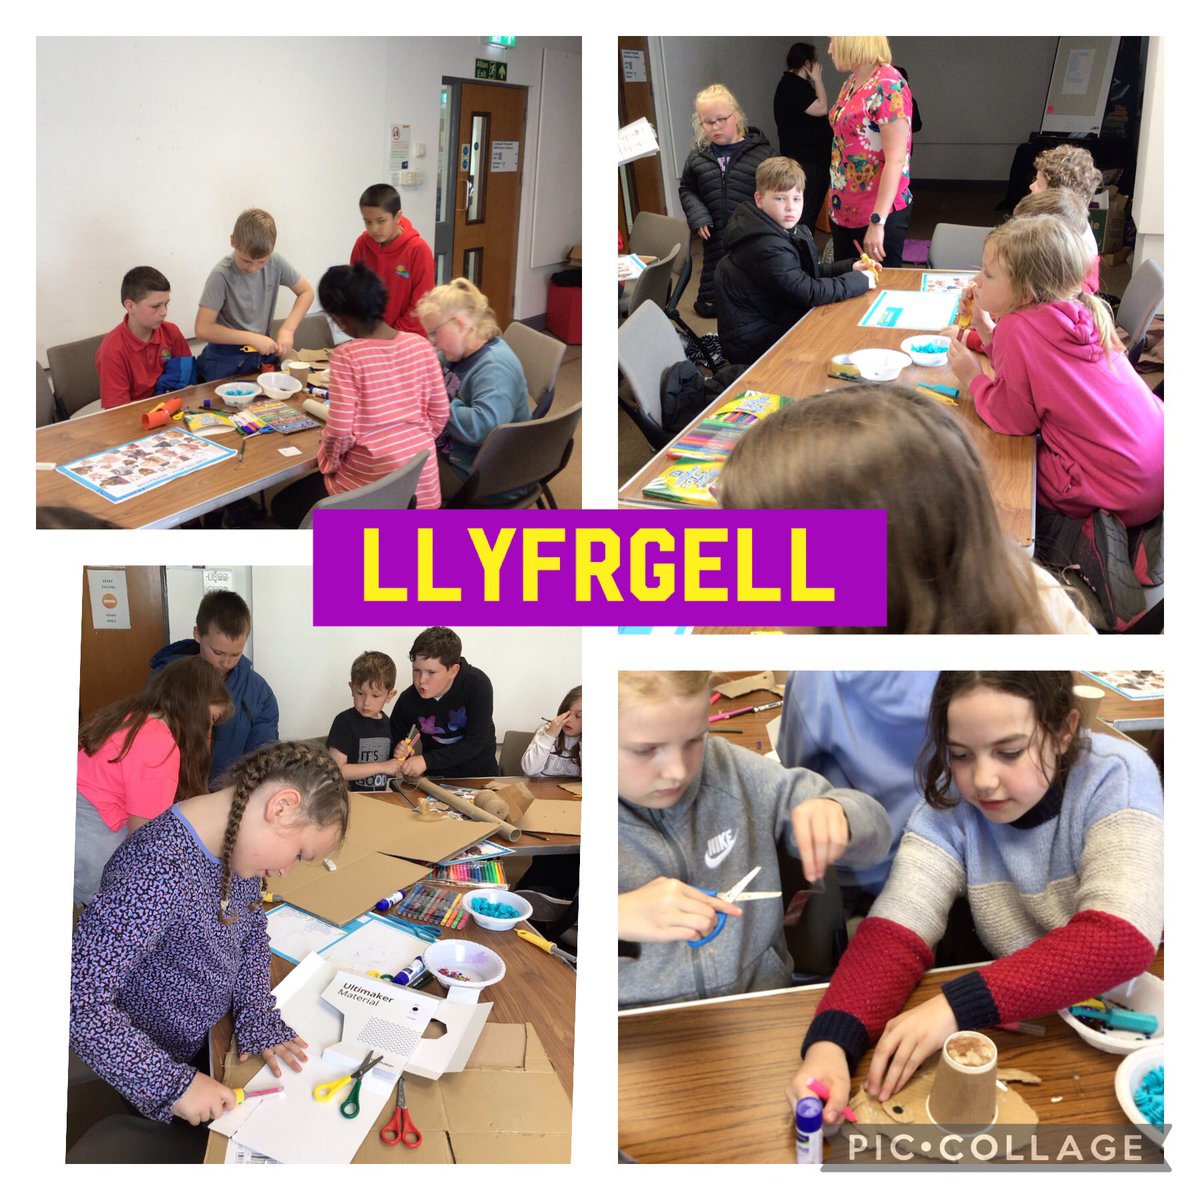 Year 3 and 4 enjoyed in the Library learning about the local area. Diolch yn fawr!